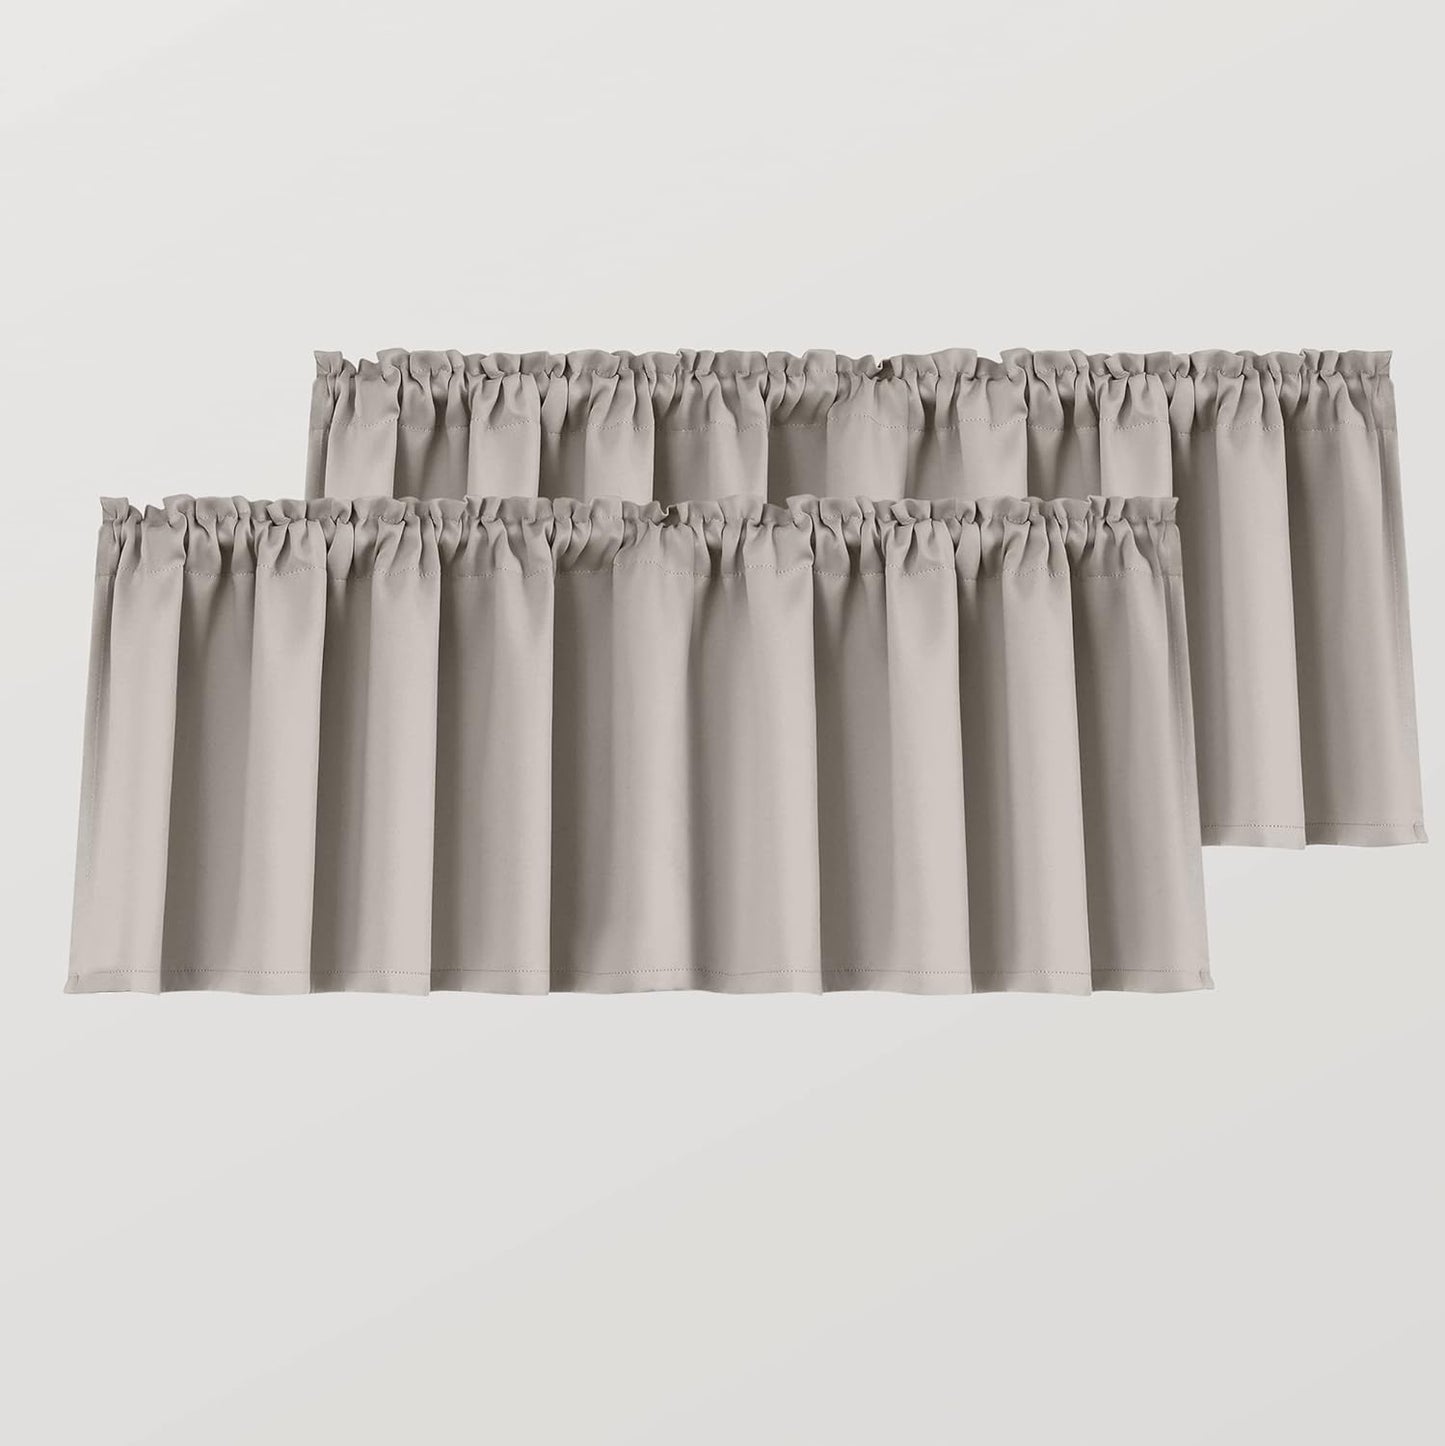 Mrs.Naturall Beige Valance Curtains for Windows 36X16 Inch Length  MRS.NATURALL TEXTILE Taupe 36X16 